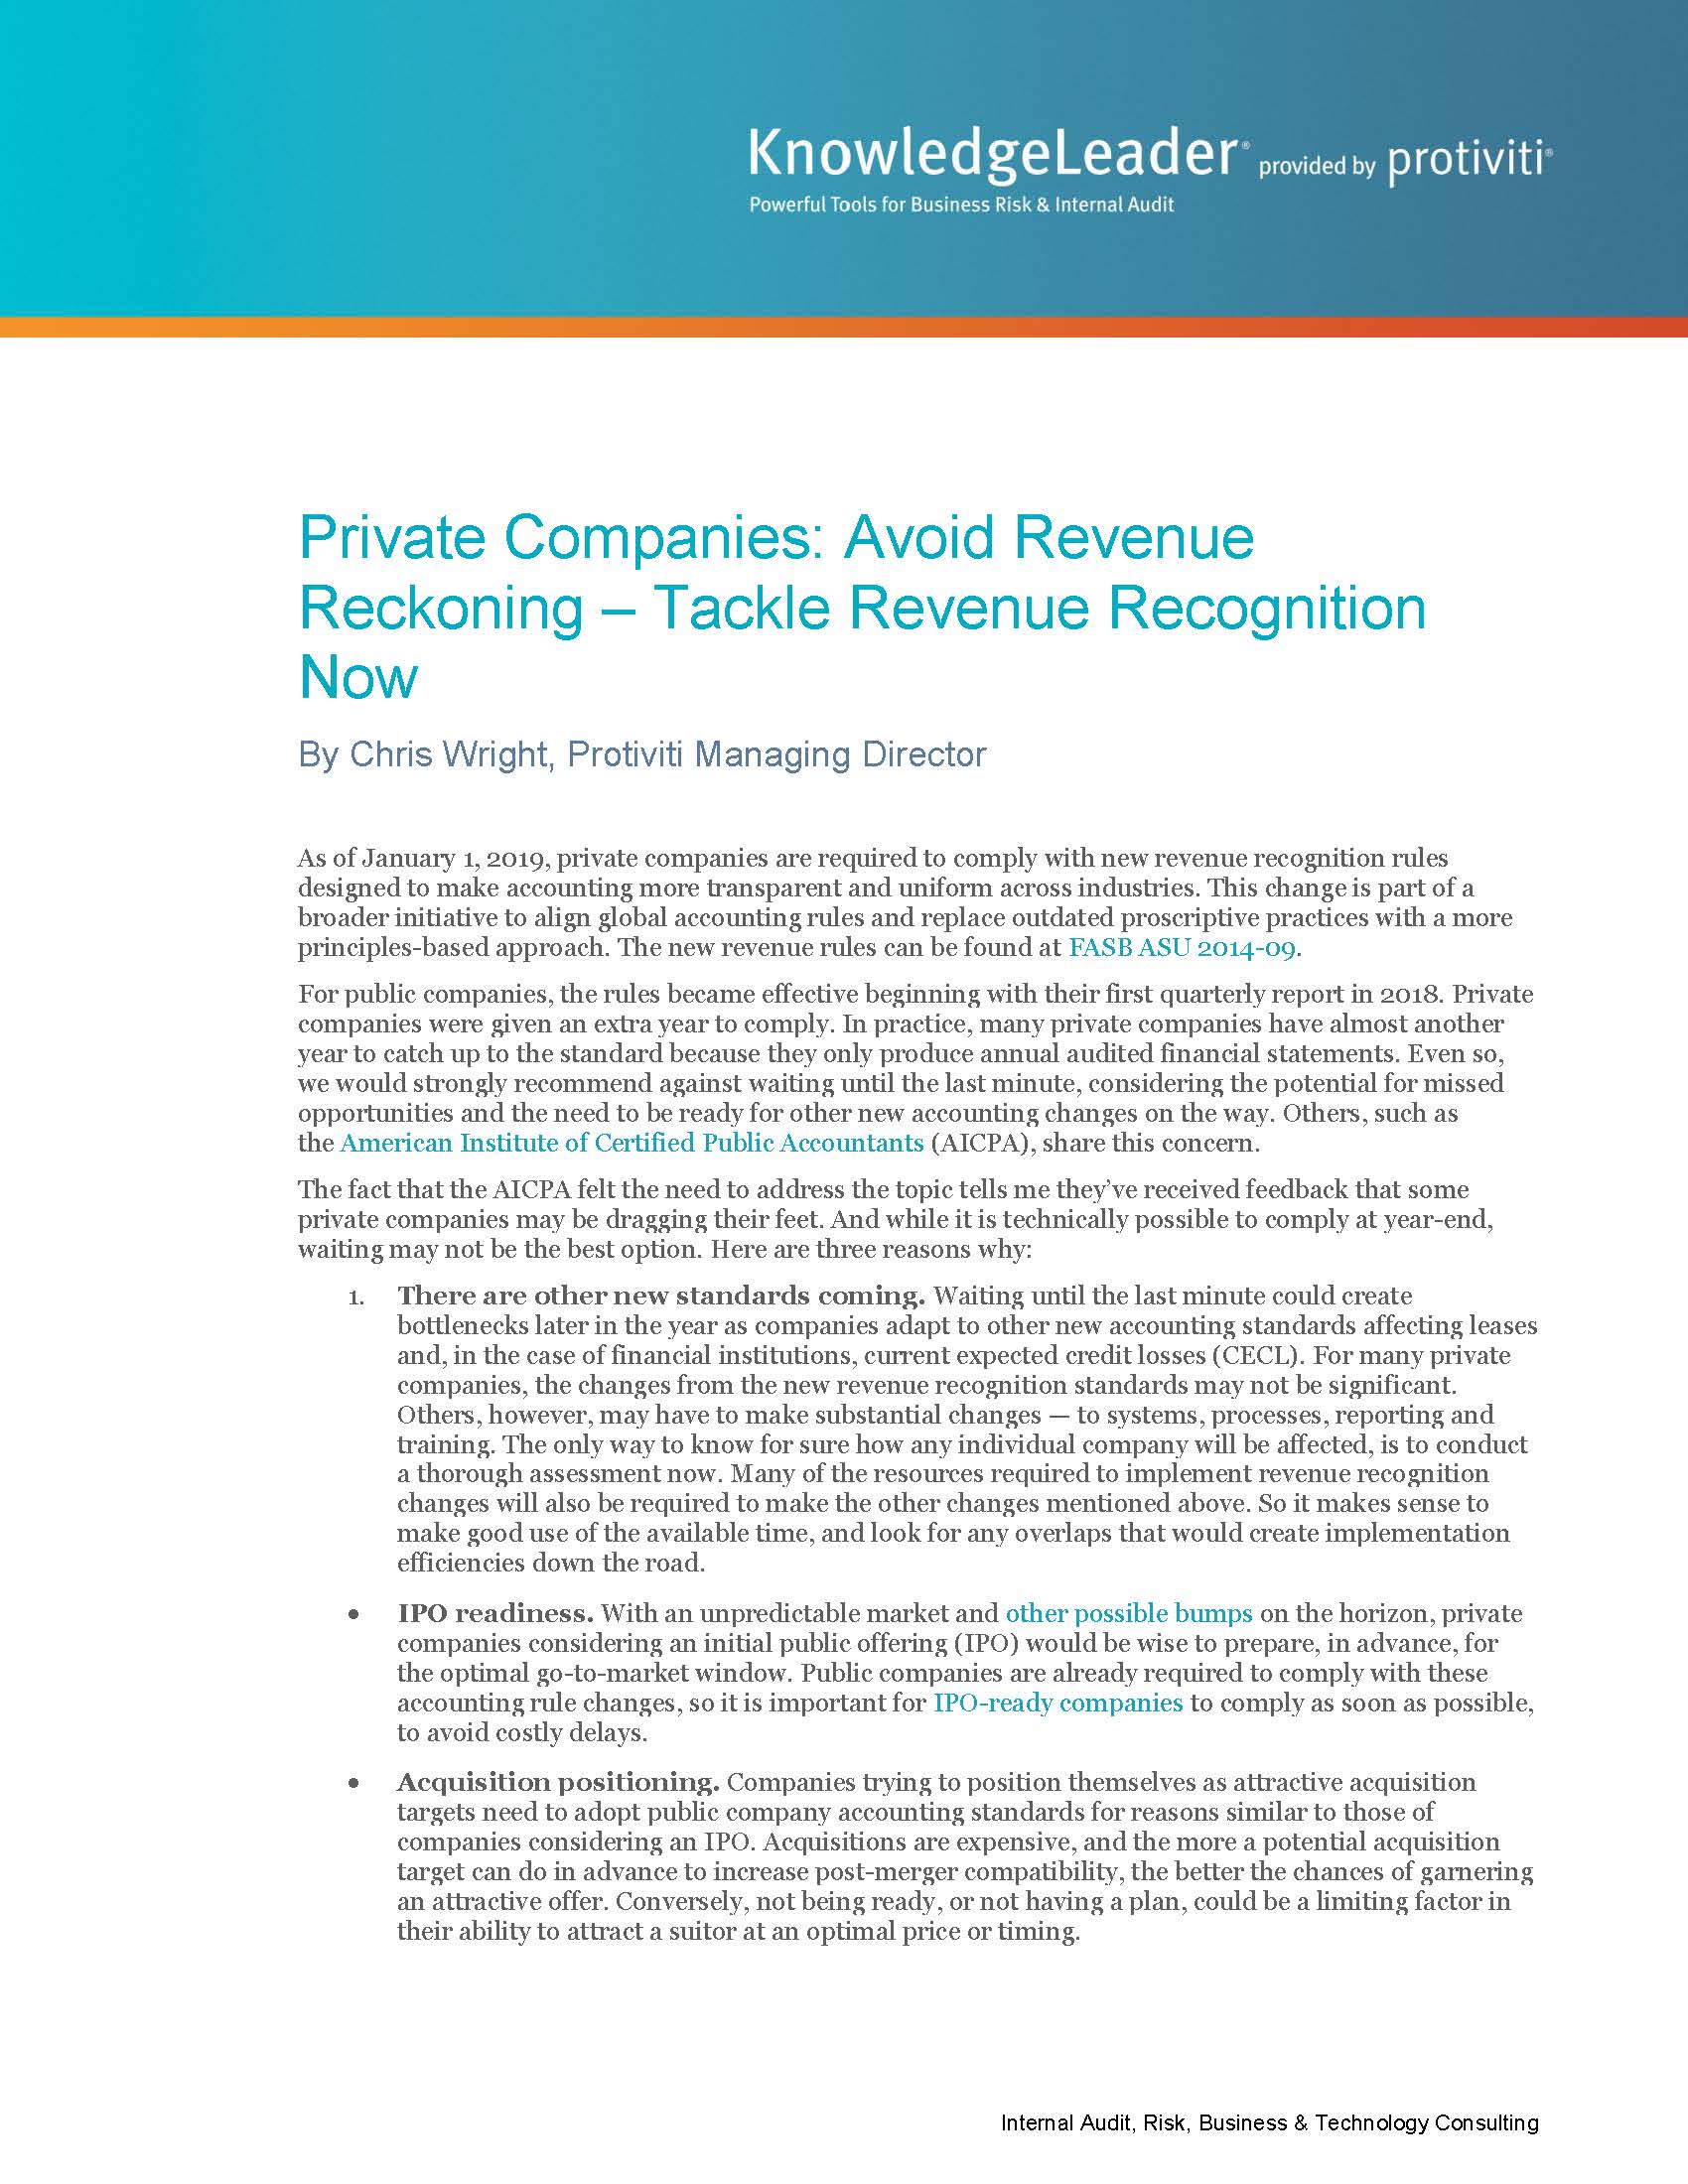 Screenshot of the first page of Private Companies Avoid Revenue Reckoning — Tackle Revenue Recognition Now